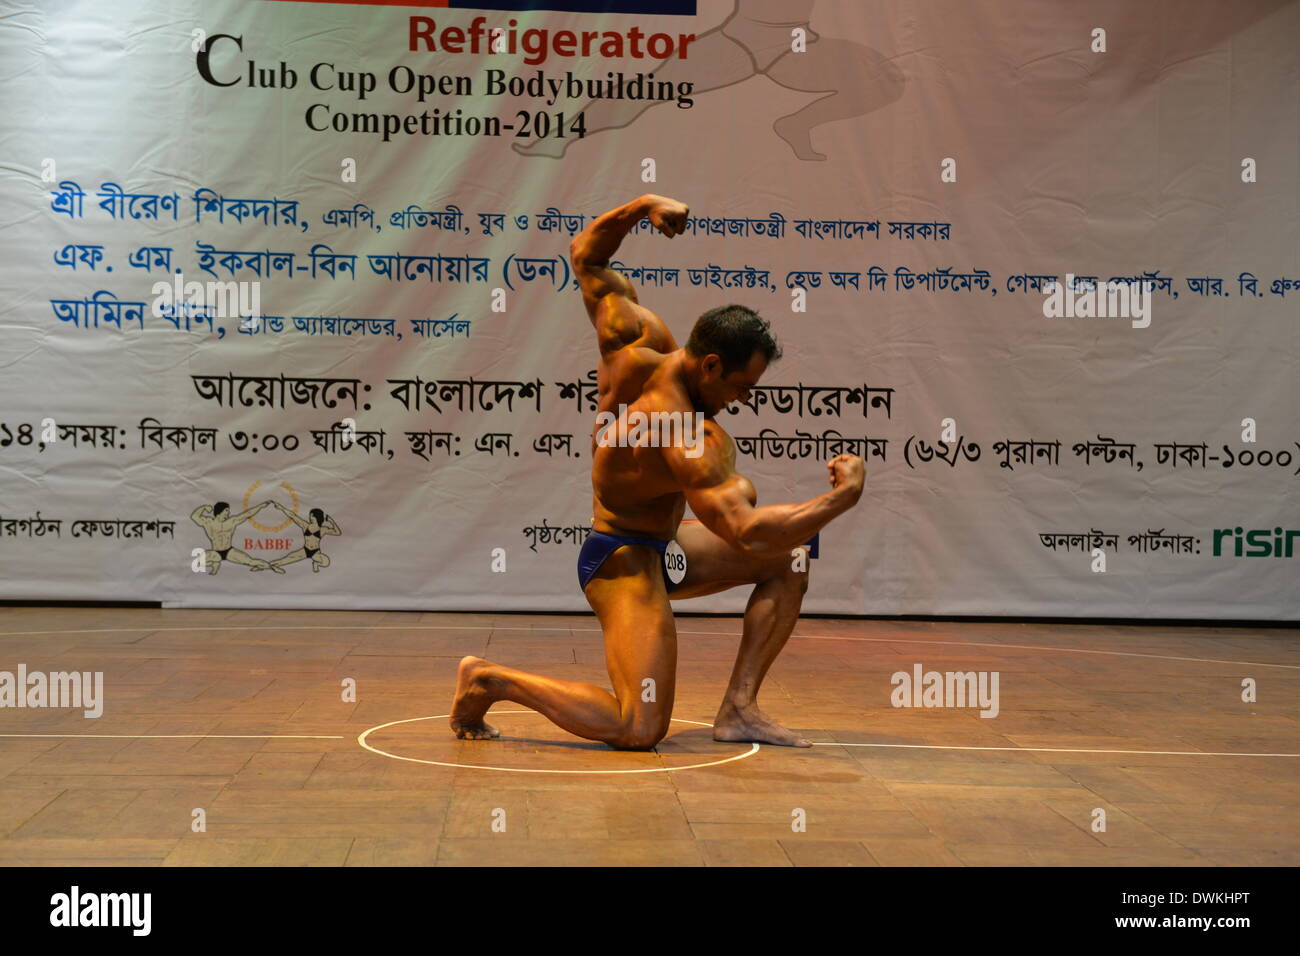 Dhaka, Bangladesh. 10th Mar, 2014. A Bangladeshi bodybuilder competes in a Club Cup Open Bodybuilding competition in Dhaka, Bangladesh, March 10, 2014. Some 250 bodybuilders from 55 clubs are expected to participate in the meet in seven-weight-categories. Credit:  Shariful Islam/Xinhua/Alamy Live News Stock Photo